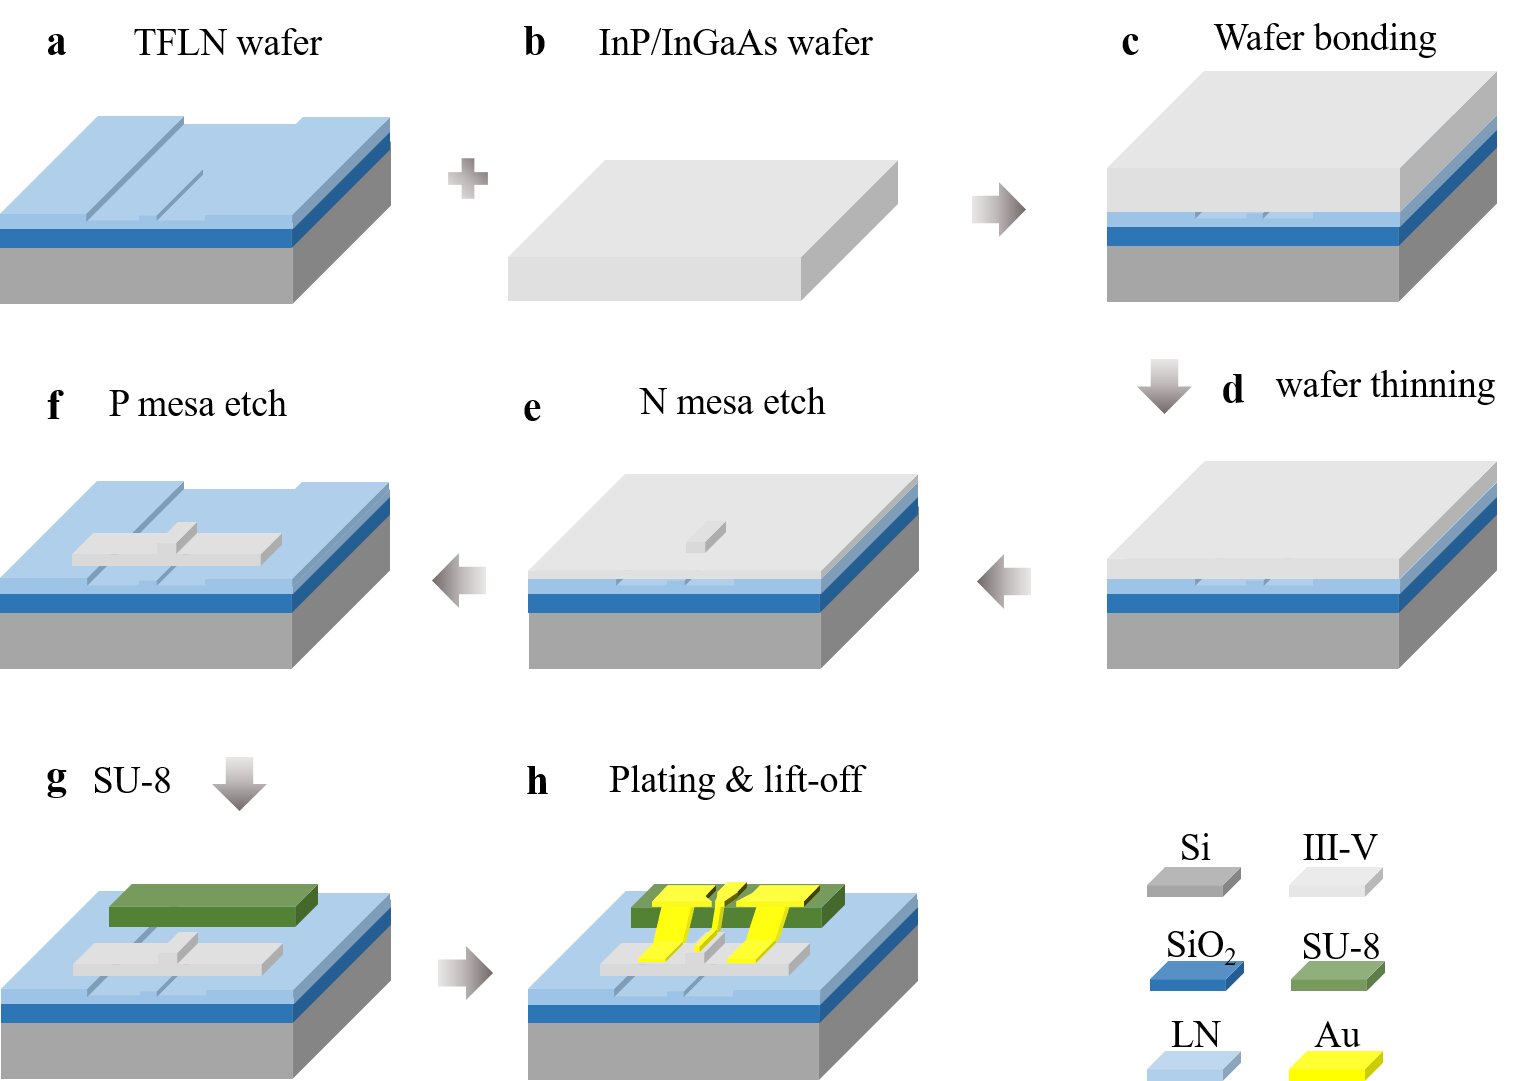 (a): TFLN wafer with pre-defined waveguide and passive components. (b): Bare InP/InGaAs wafer. (c): InP/InGaAs wafer and TFLN wafer bonding. (d): InP/InGaAs wafer substrate removal. (e): N mesa dry etch. (f): P mesa dry etch. (g): SU-8 base for CPW pad. (h): Metal electroplating and lift-off. Courtesy of C. Wei, Y. Yu, Z. Wang, L. Jiang, Z. Zeng, J. Ye, X. Zou, W. Pan, X. Xie, and L. Yan.